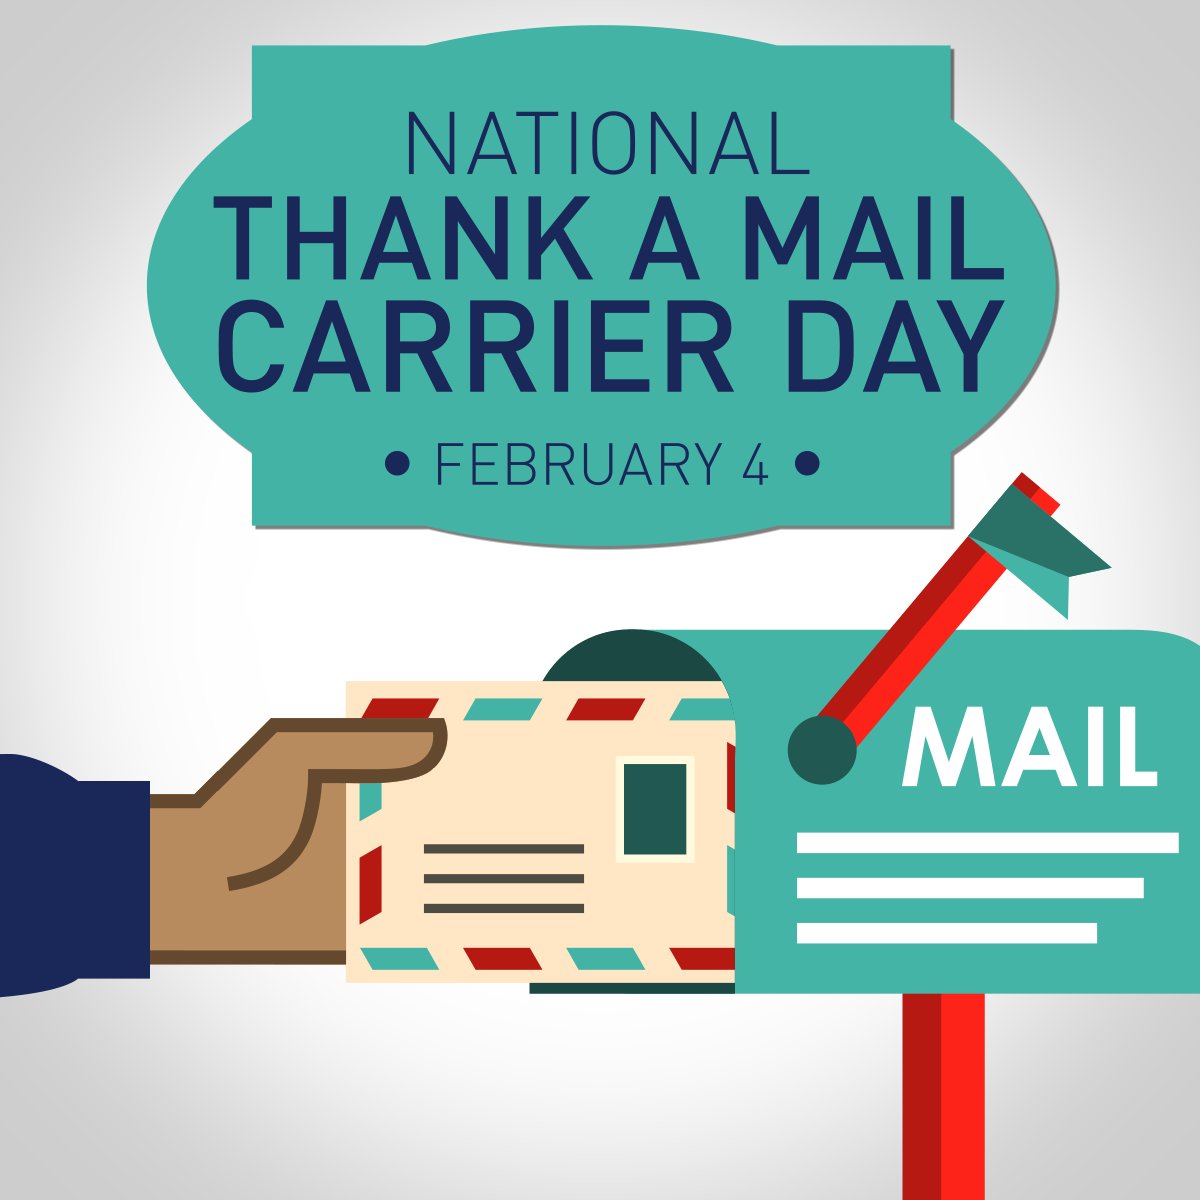 Clip art picture of a Mailbox with the arm and hand of a postal worker putting a letter in the mailbox. Above that is a section with the words "National Thank A Mail Carrier Day, February 4th" written out. 